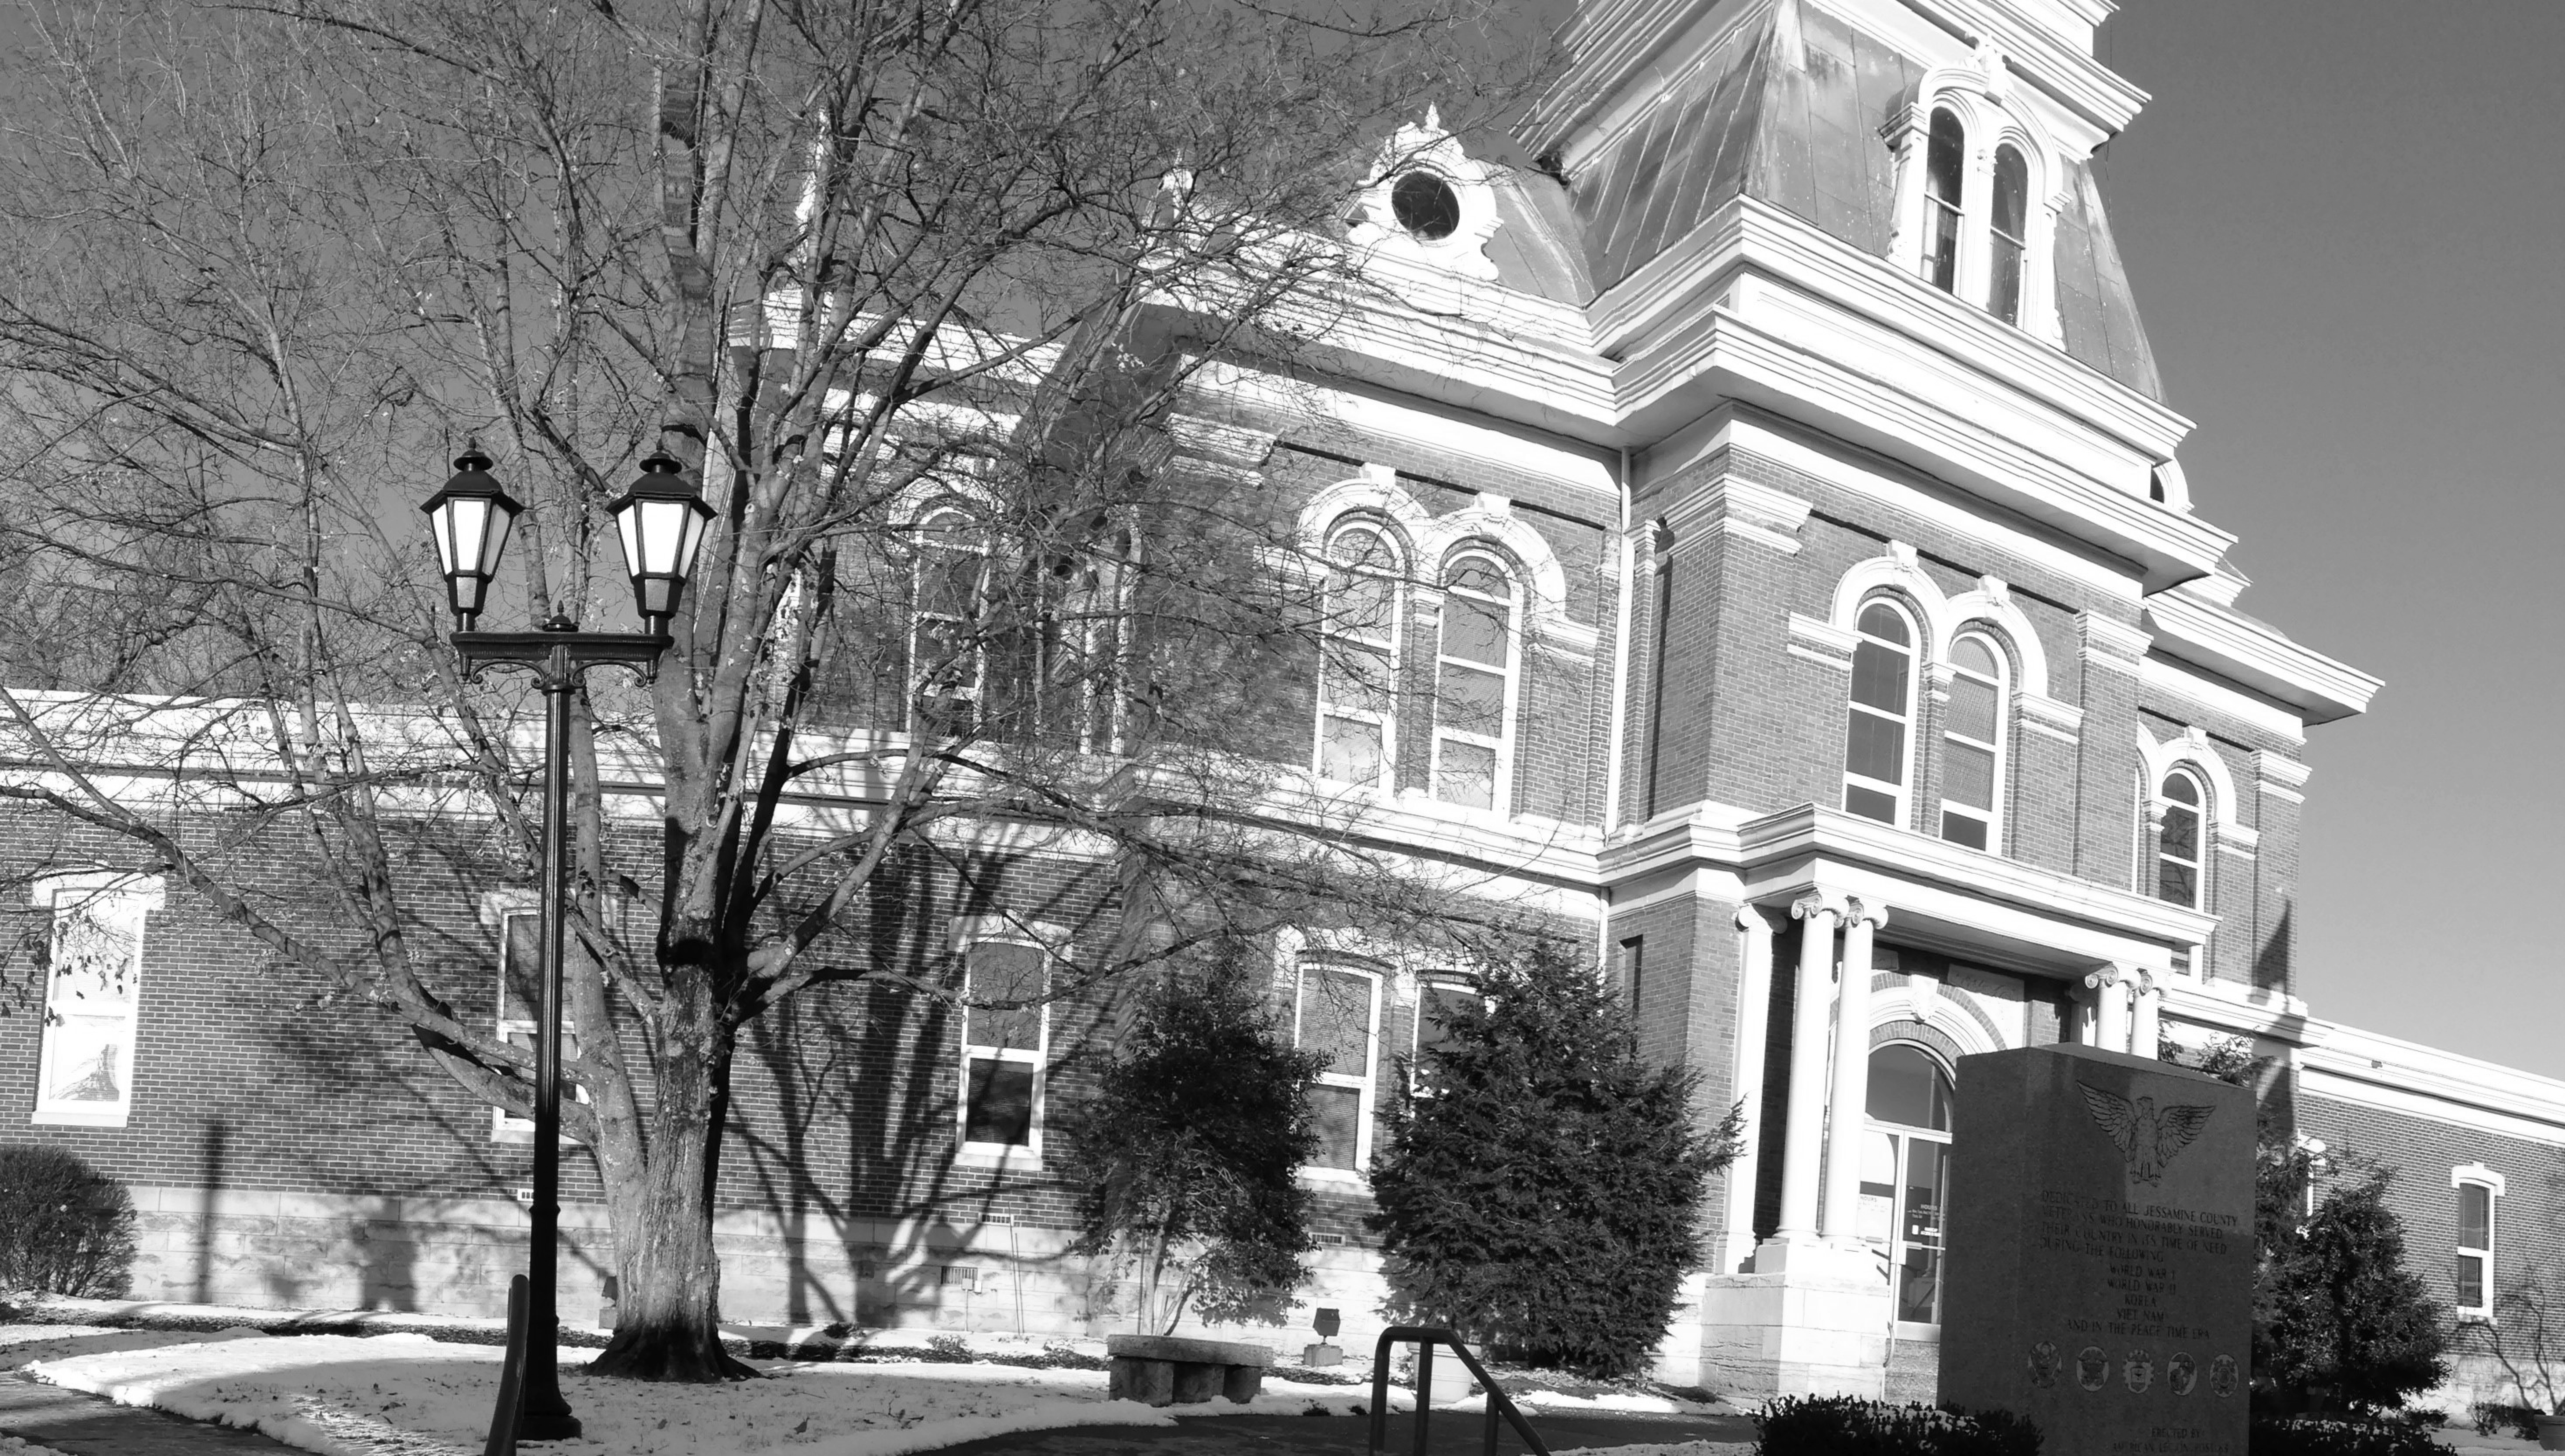 The Jessamine County courthouse located in Nicholasville, Kentucky.